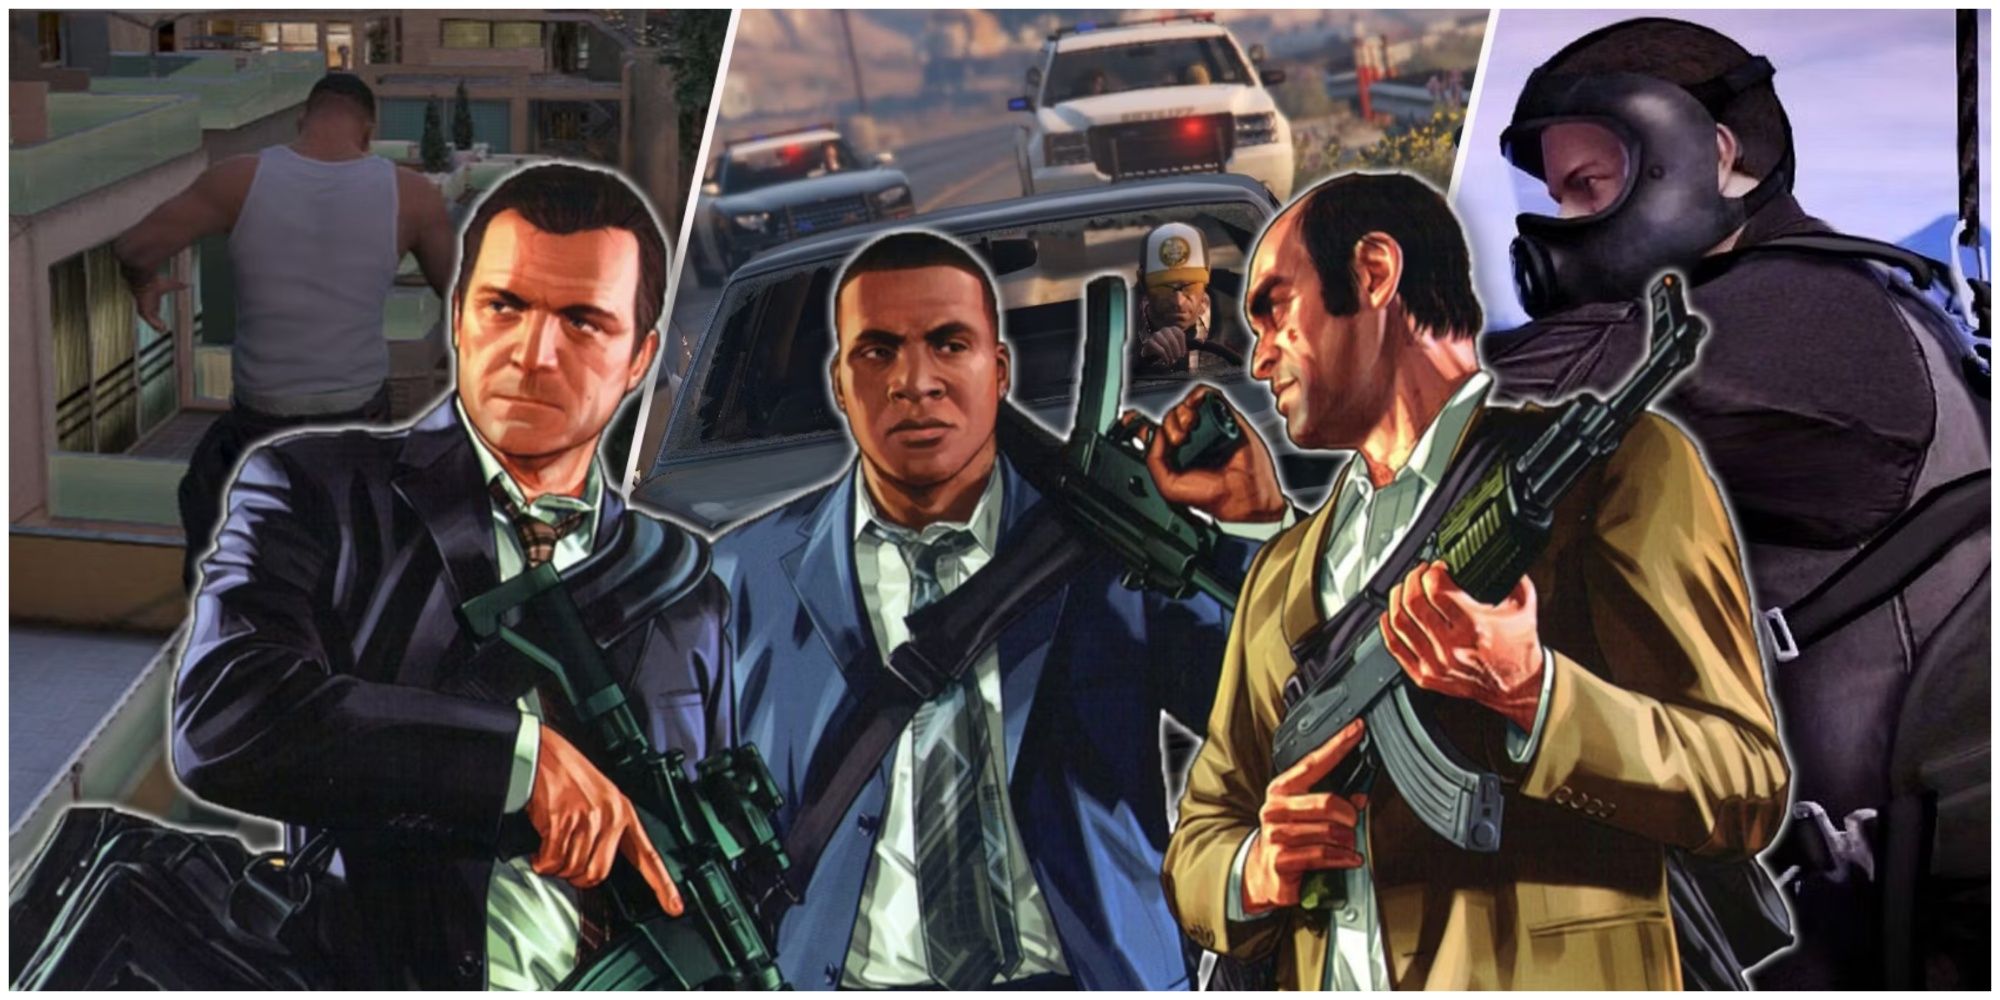 Unleash Your Inner Beast With GTA V's New Power Play Mode, 2X RP